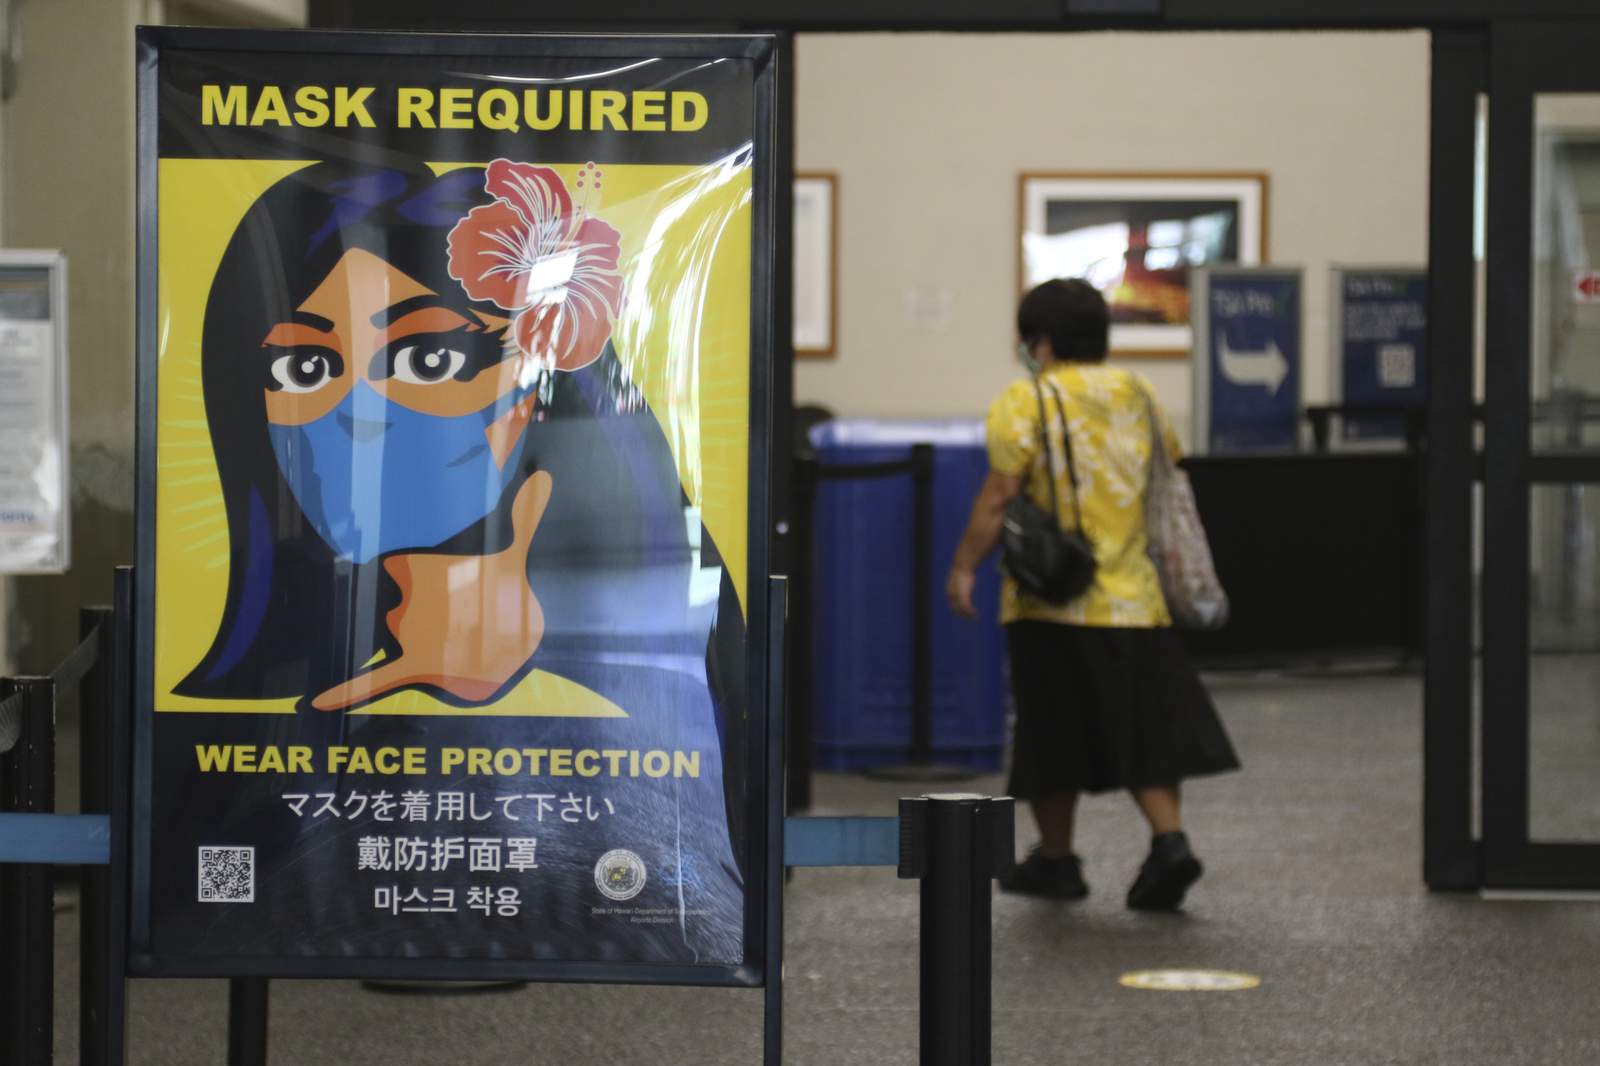 Mostly virus-free Kauai hit by pandemic after travel resumes